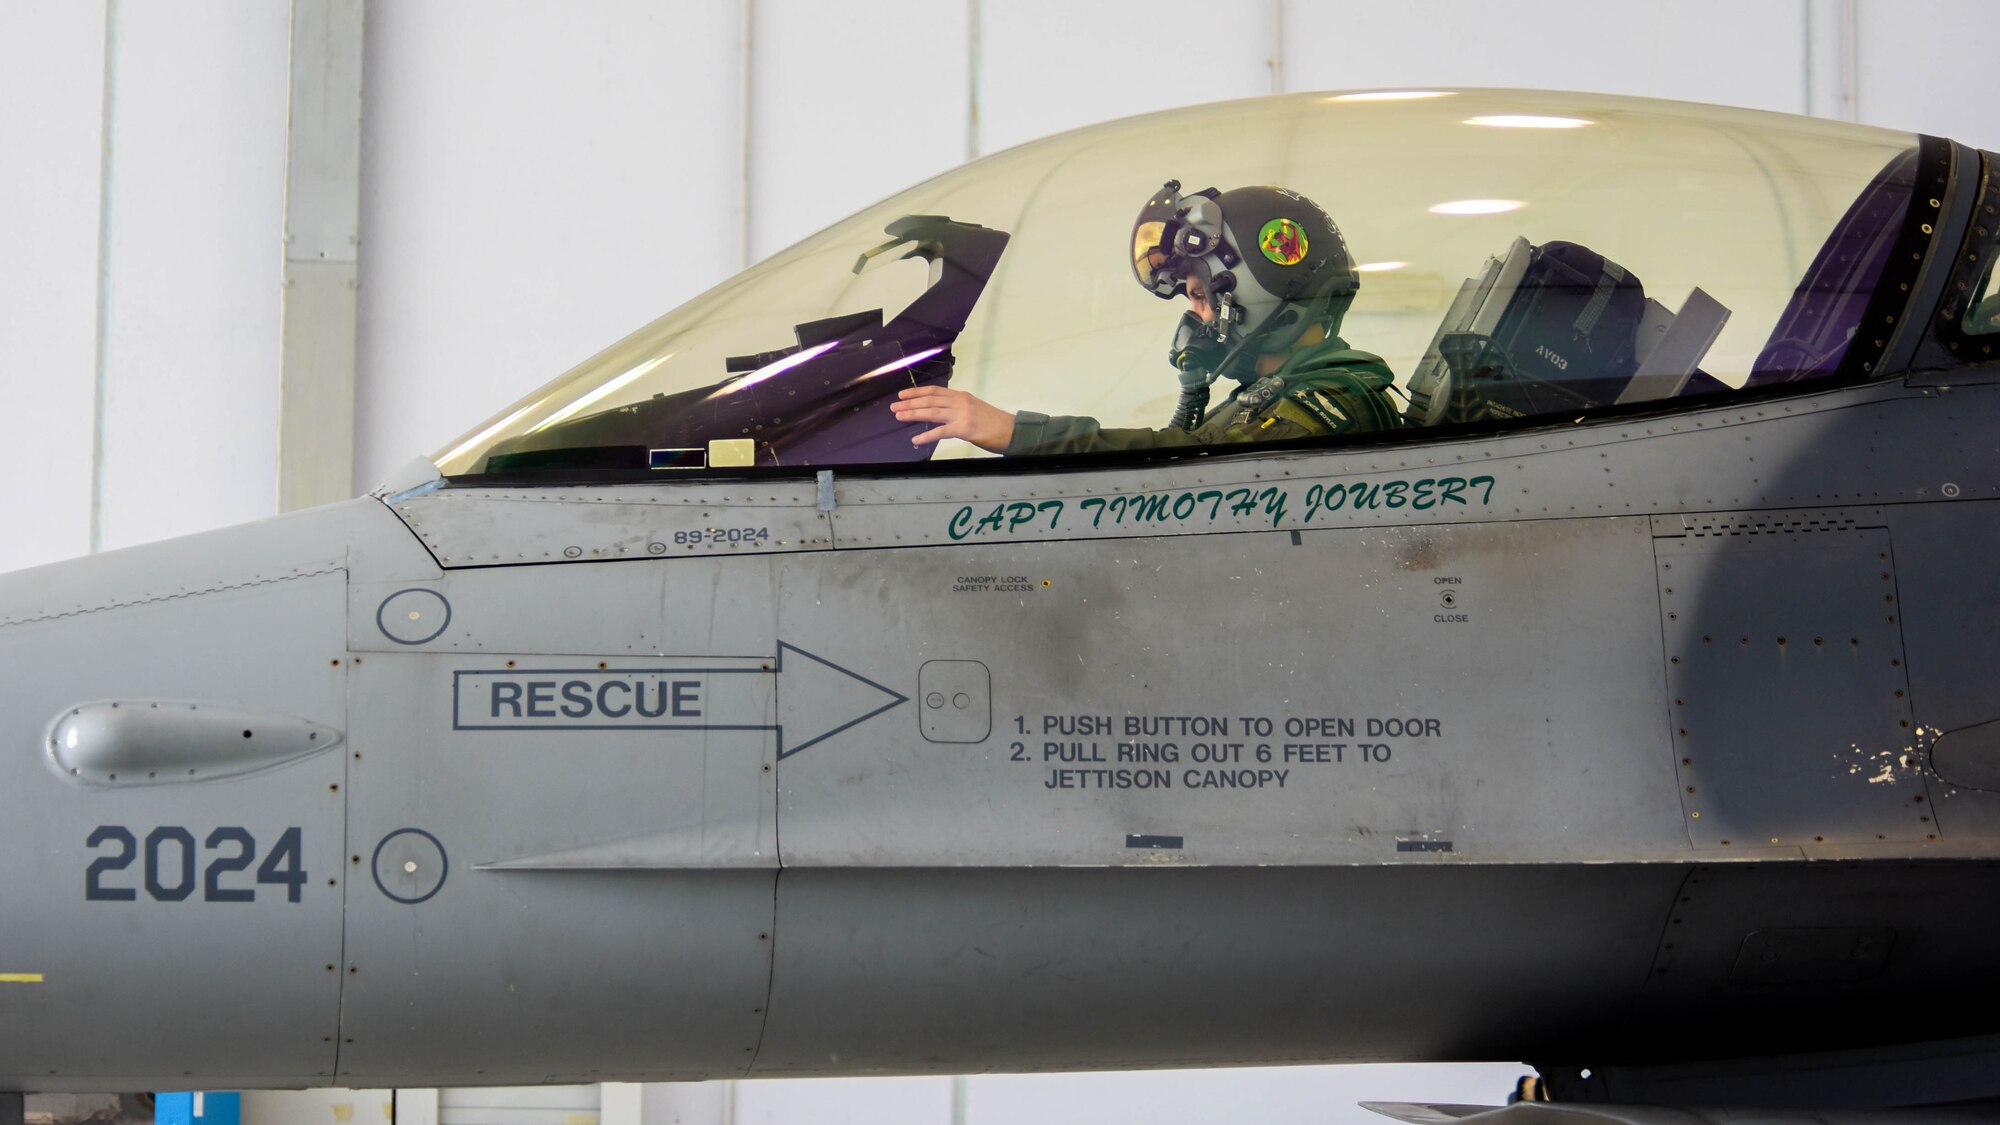 A U.S. Air Force F-16 Fighting Falcon pilot assigned to the 555th Fighter Squadron prepares to participate in exercise Falcon Strike 21 (FS21) at Amendola Air Base, Italy, June 7, 2021. Aircraft participating in FS21 include the U.S. Air Force F-35 Lightning II and F-16 aircraft and U.S. Marine Corps, Royal air force, Italian air force, and Israeli air force F-35B aircraft. (U.S. Air Force photo by Airman 1st Class Brooke Moeder)